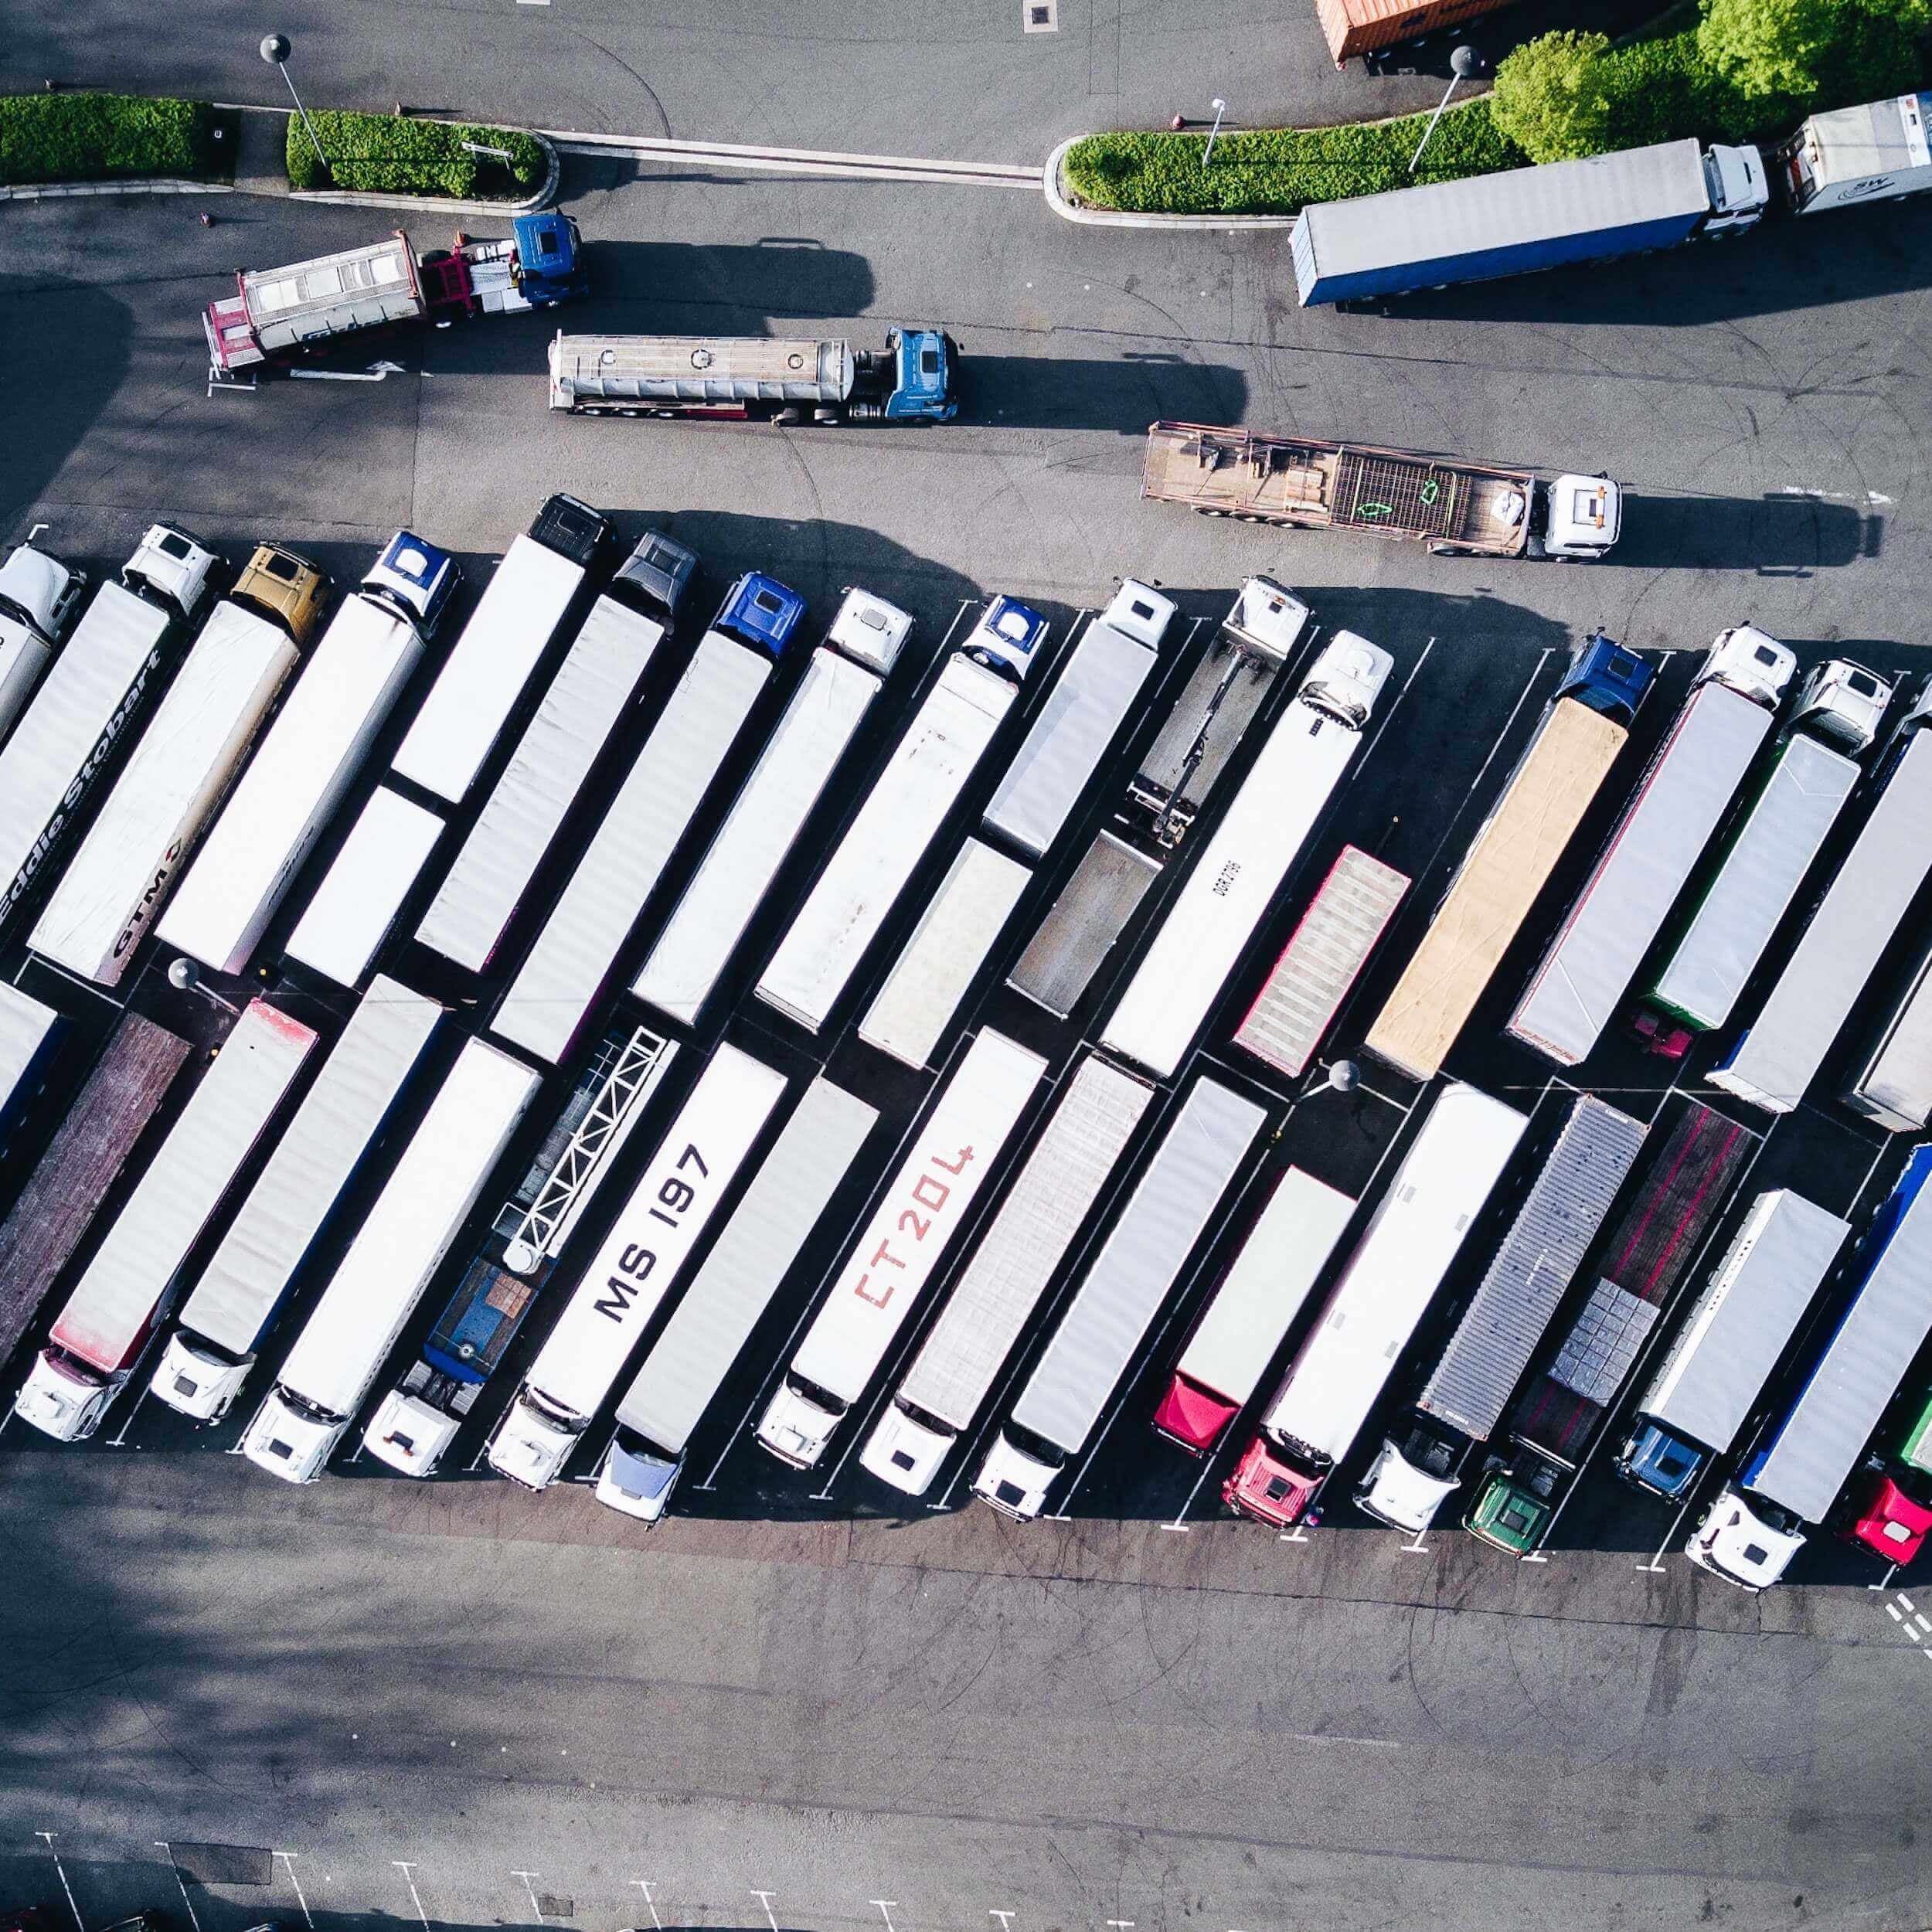 Aerial view of trucks lined up for frieght